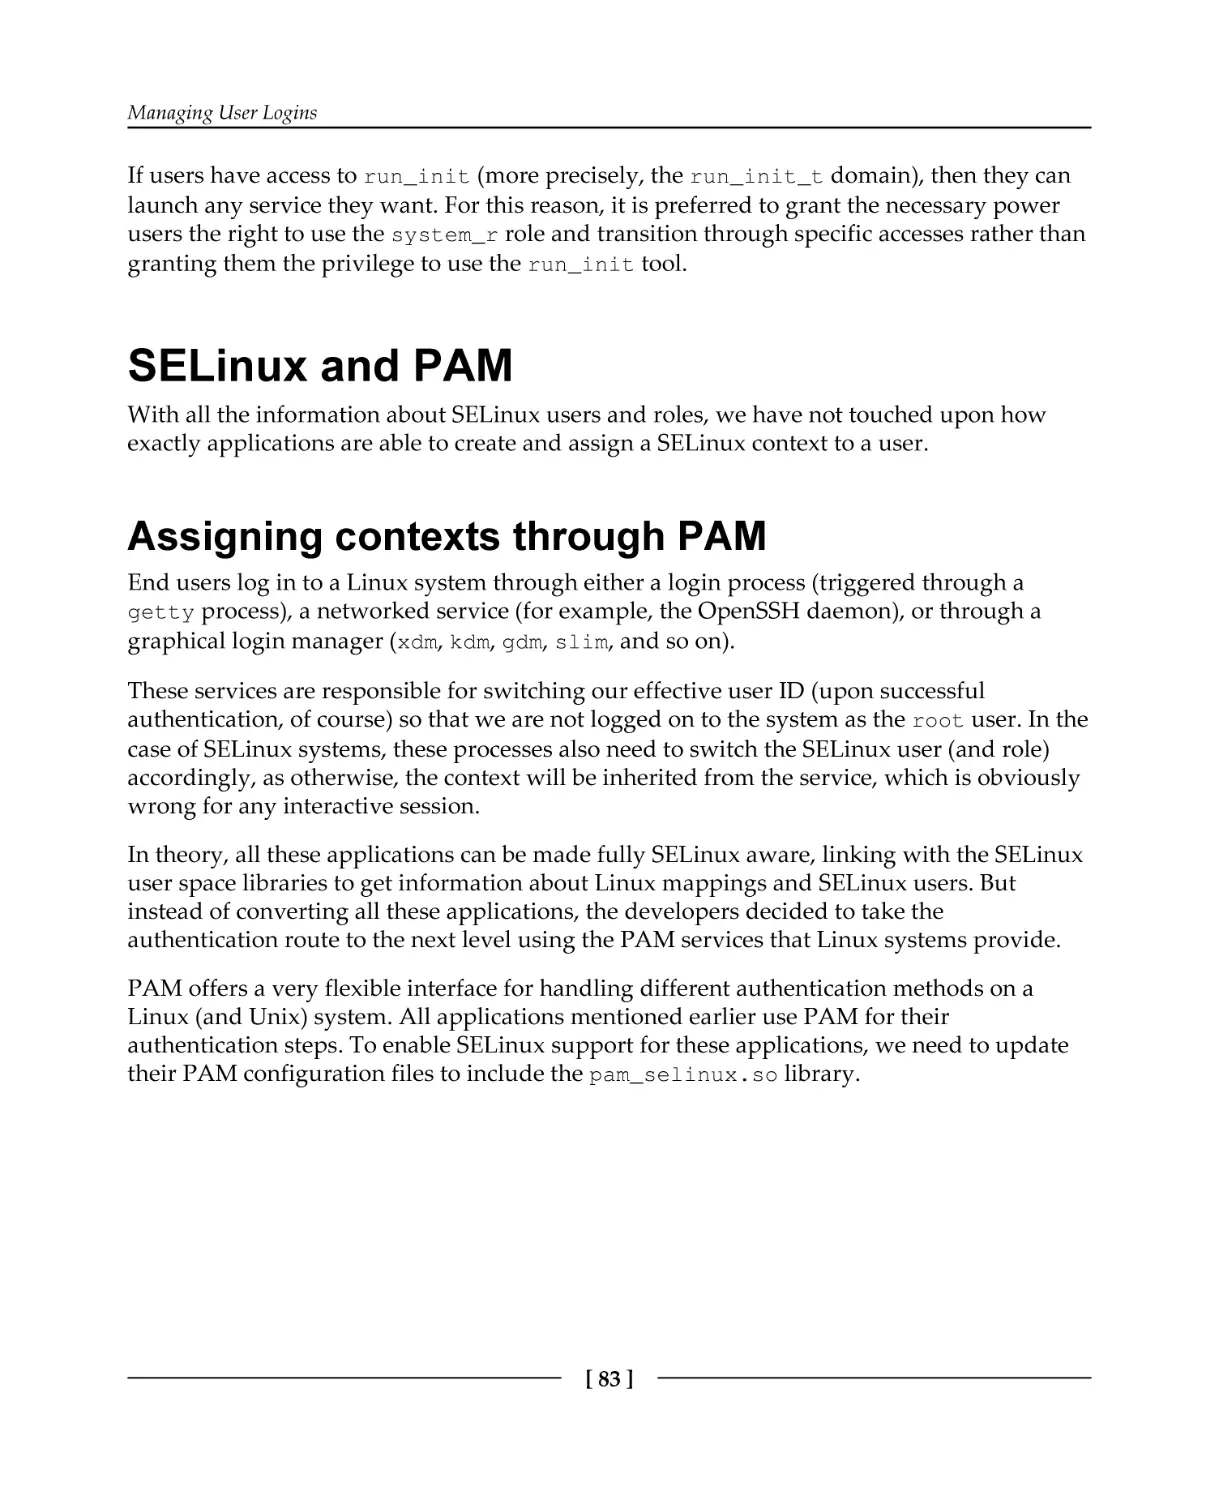 SELinux and PAM
Assigning contexts through PAM